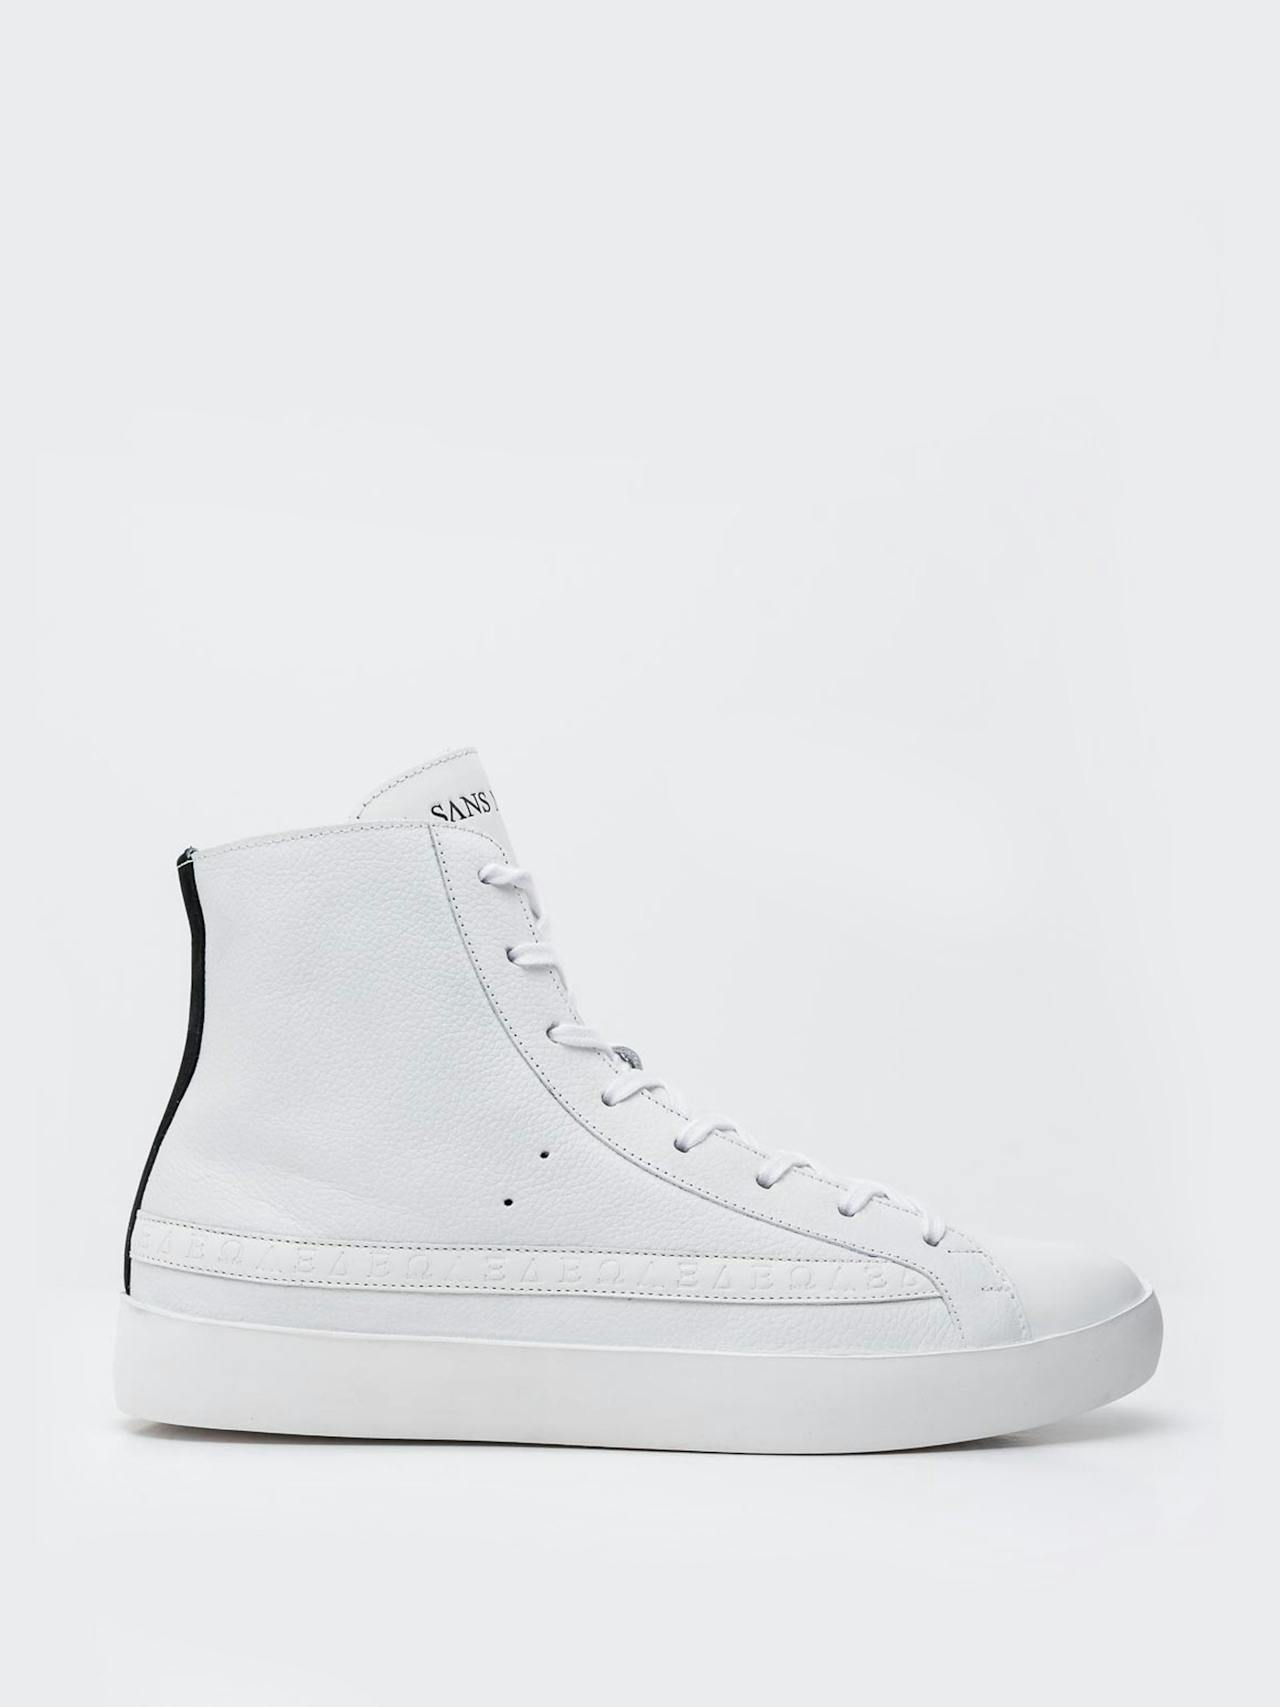 The Engel white high top trainers